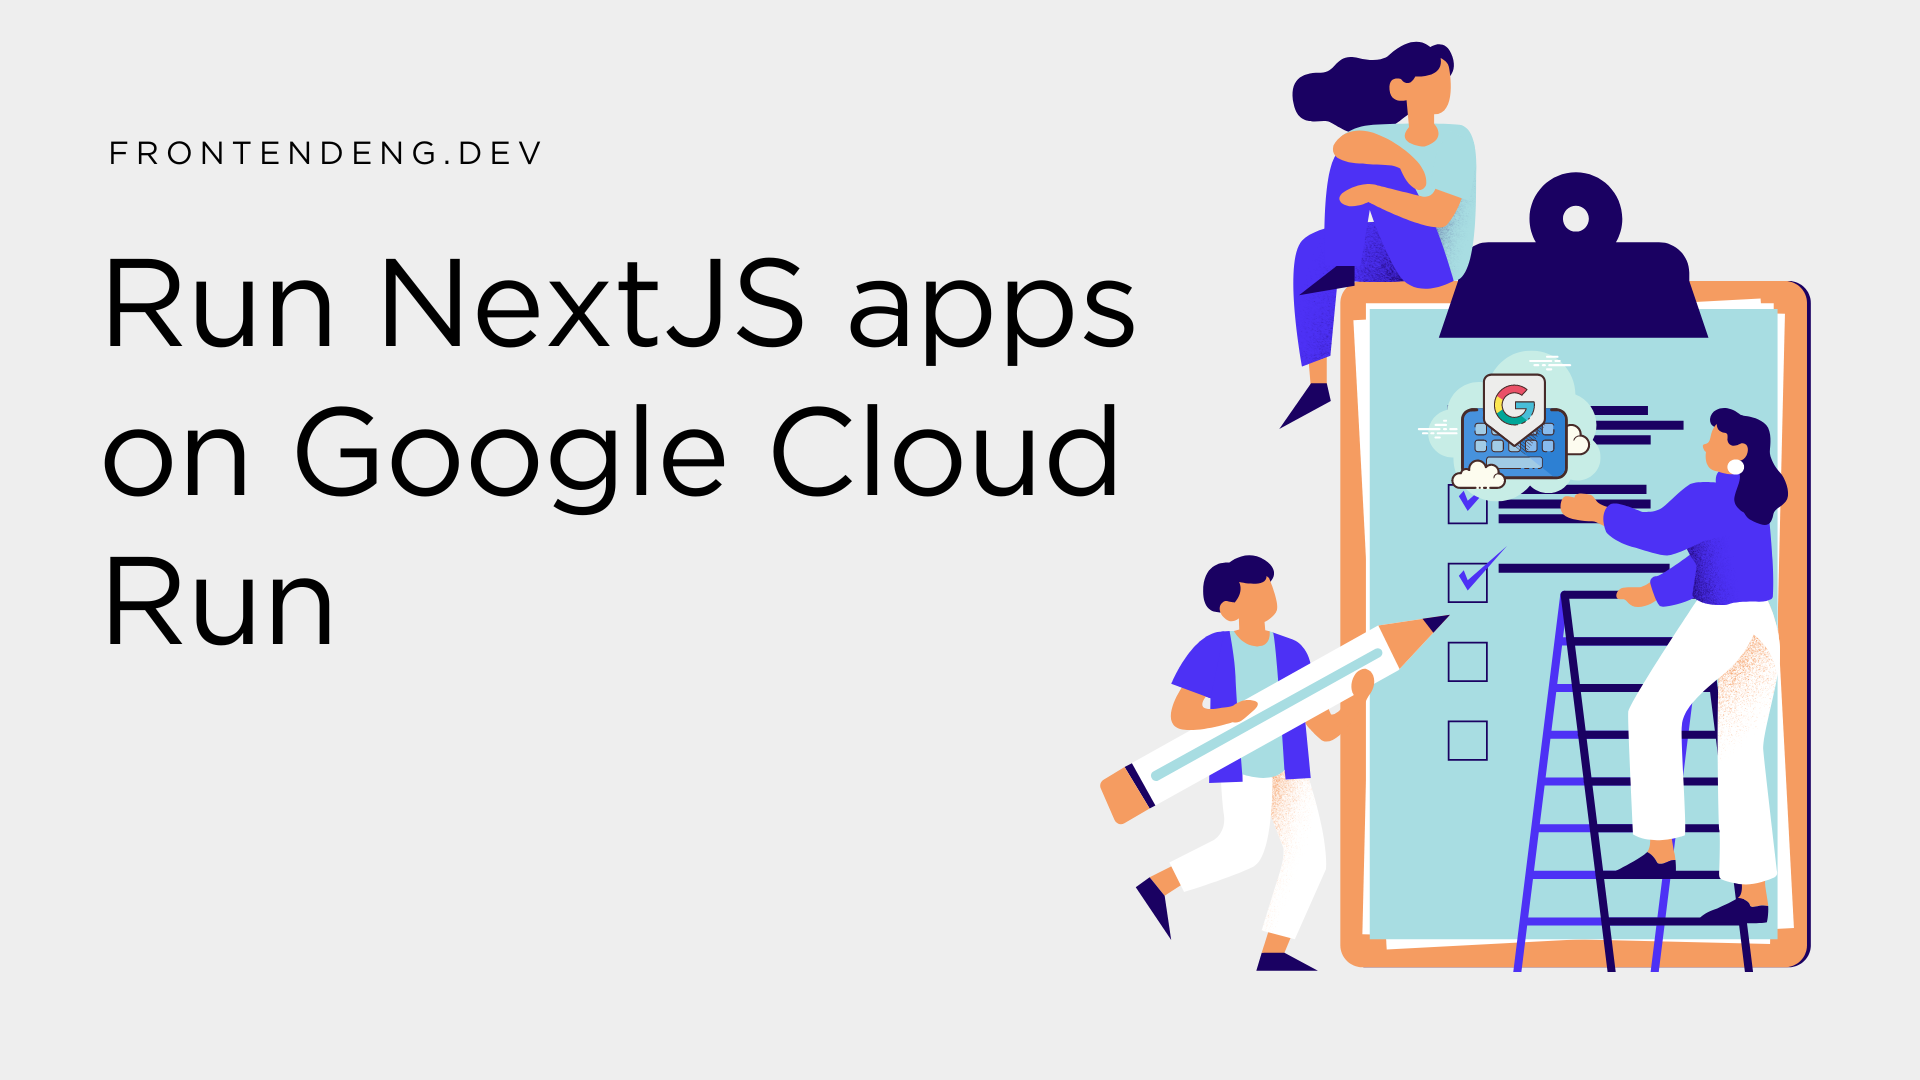 Step by step guide to deploying NextJS apps on Google Cloud run.